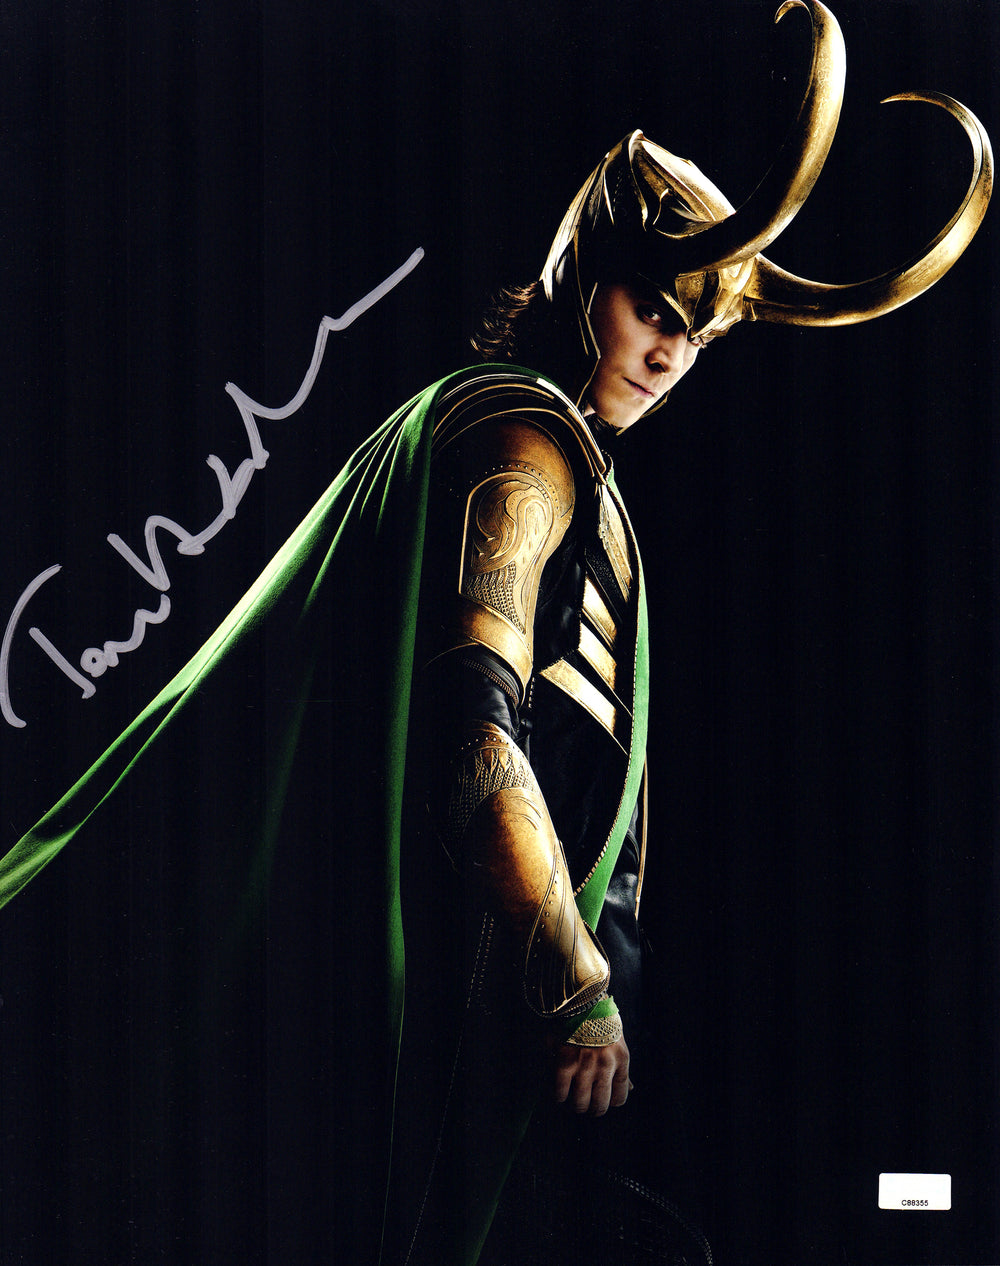 Tom Hiddleston as Loki in The Avengers Signed 11x14 Photo